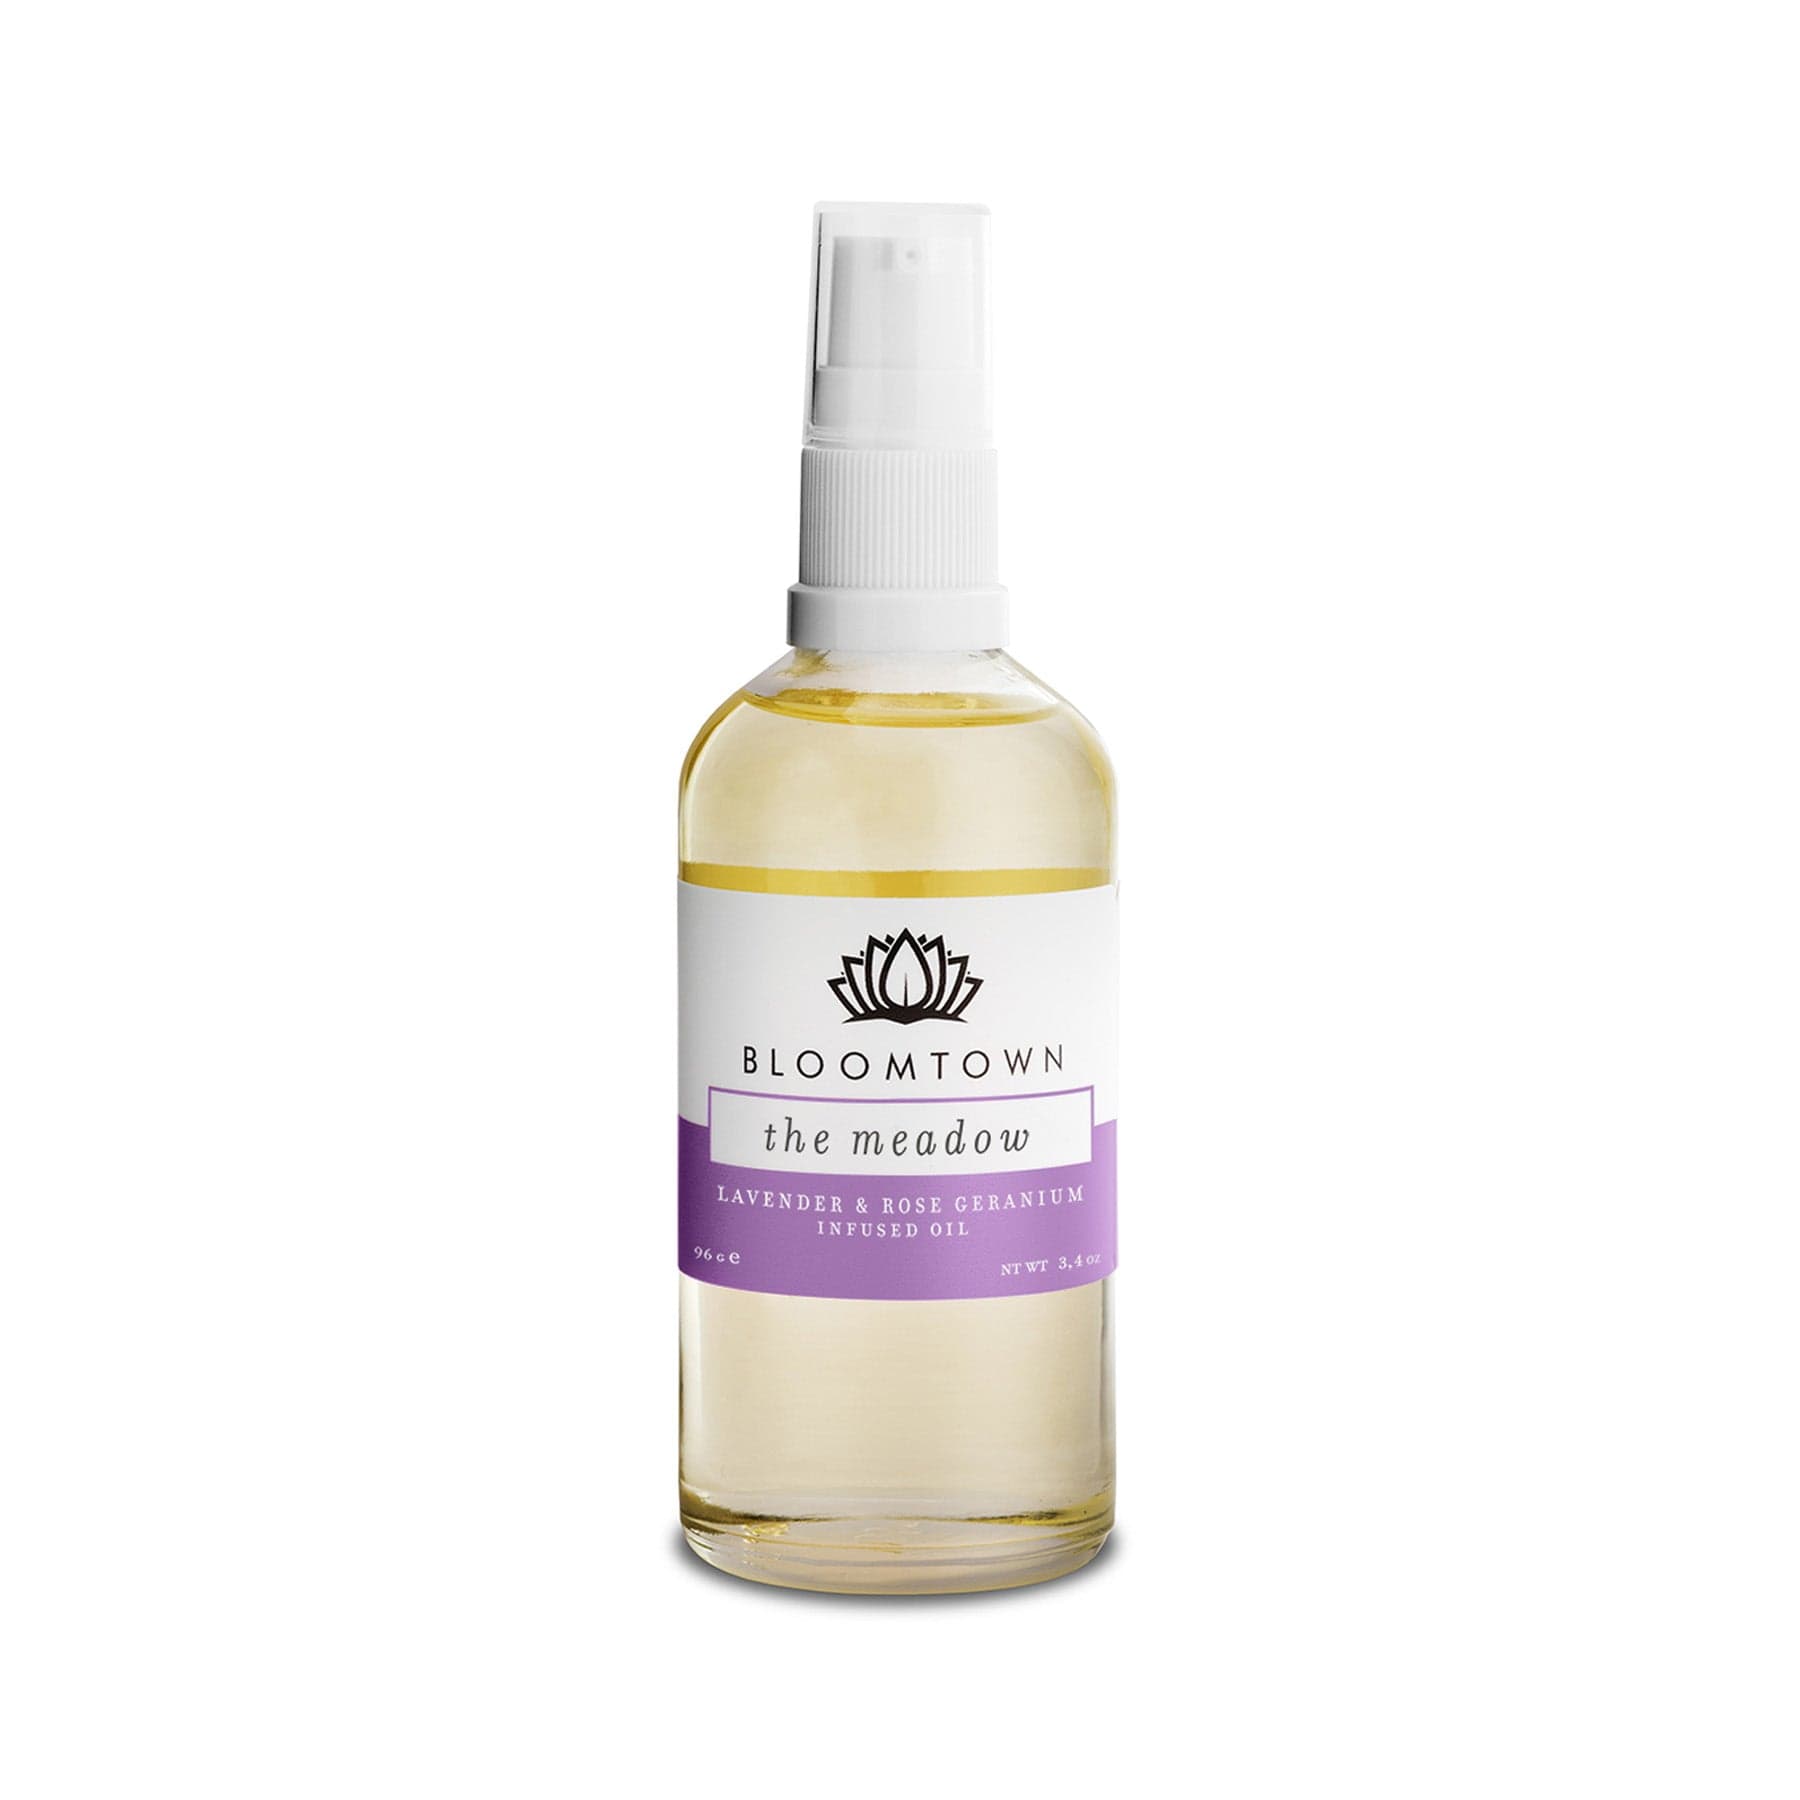 Bloomtown The Meadow lavender and rose geranium infused oil in a clear glass bottle with spray nozzle on a white background.